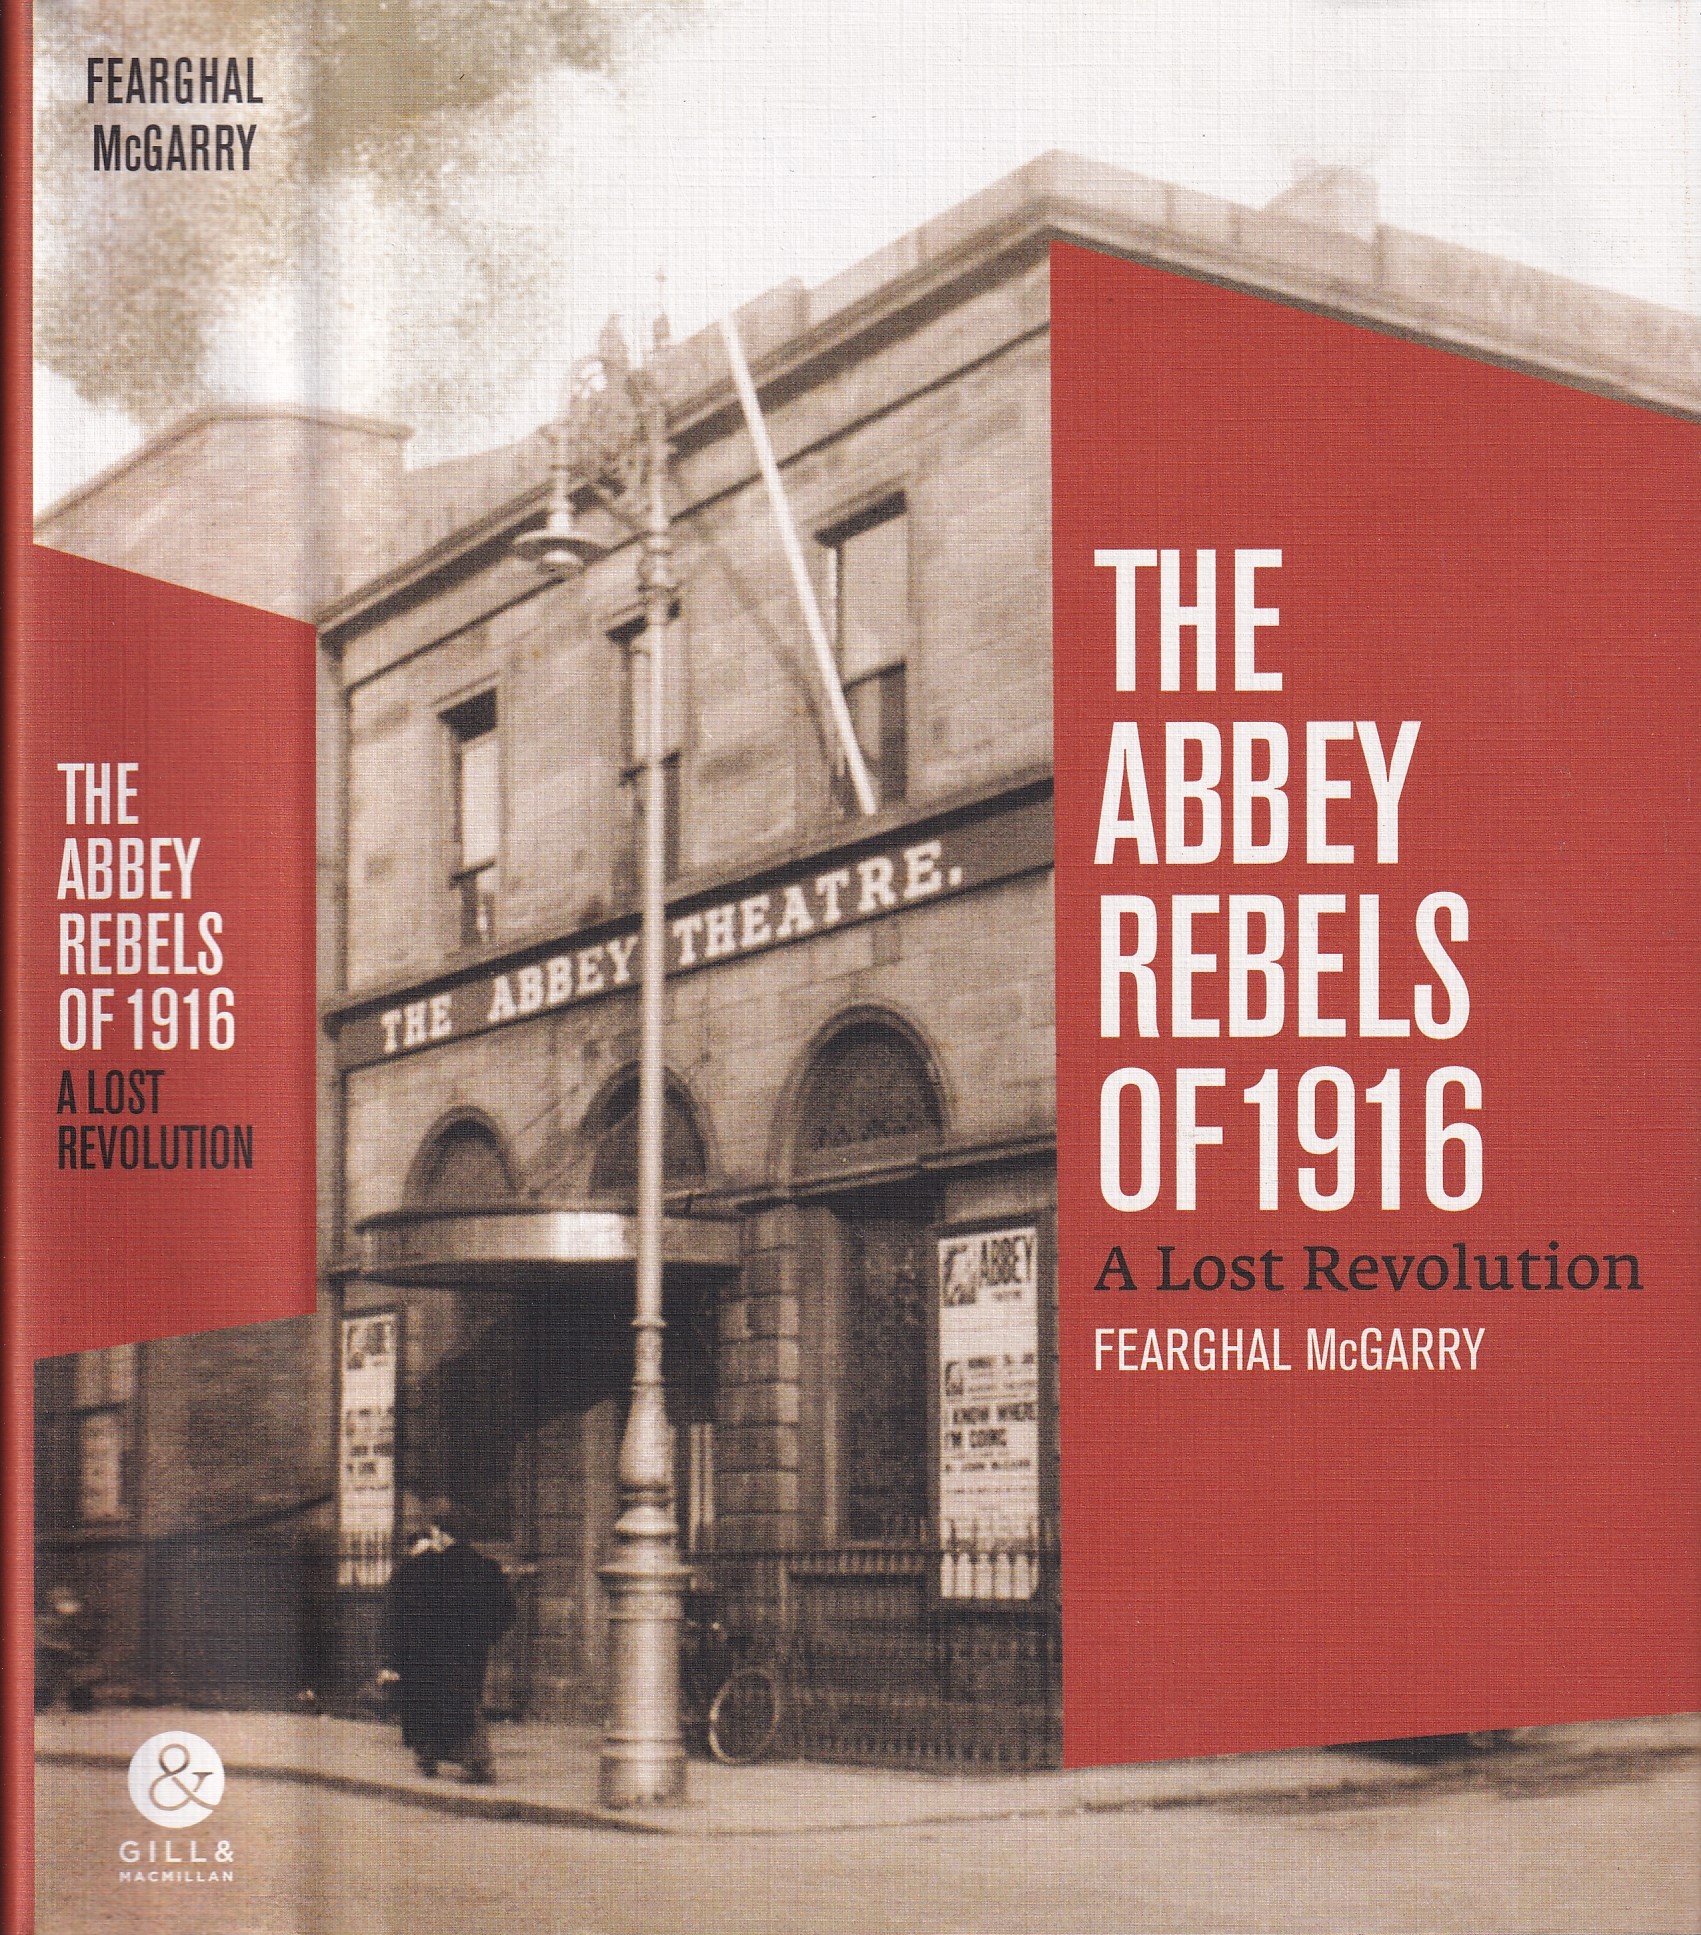 The Abbey Rebels of 1916: A Lost Revolution by Fearghal McGarry